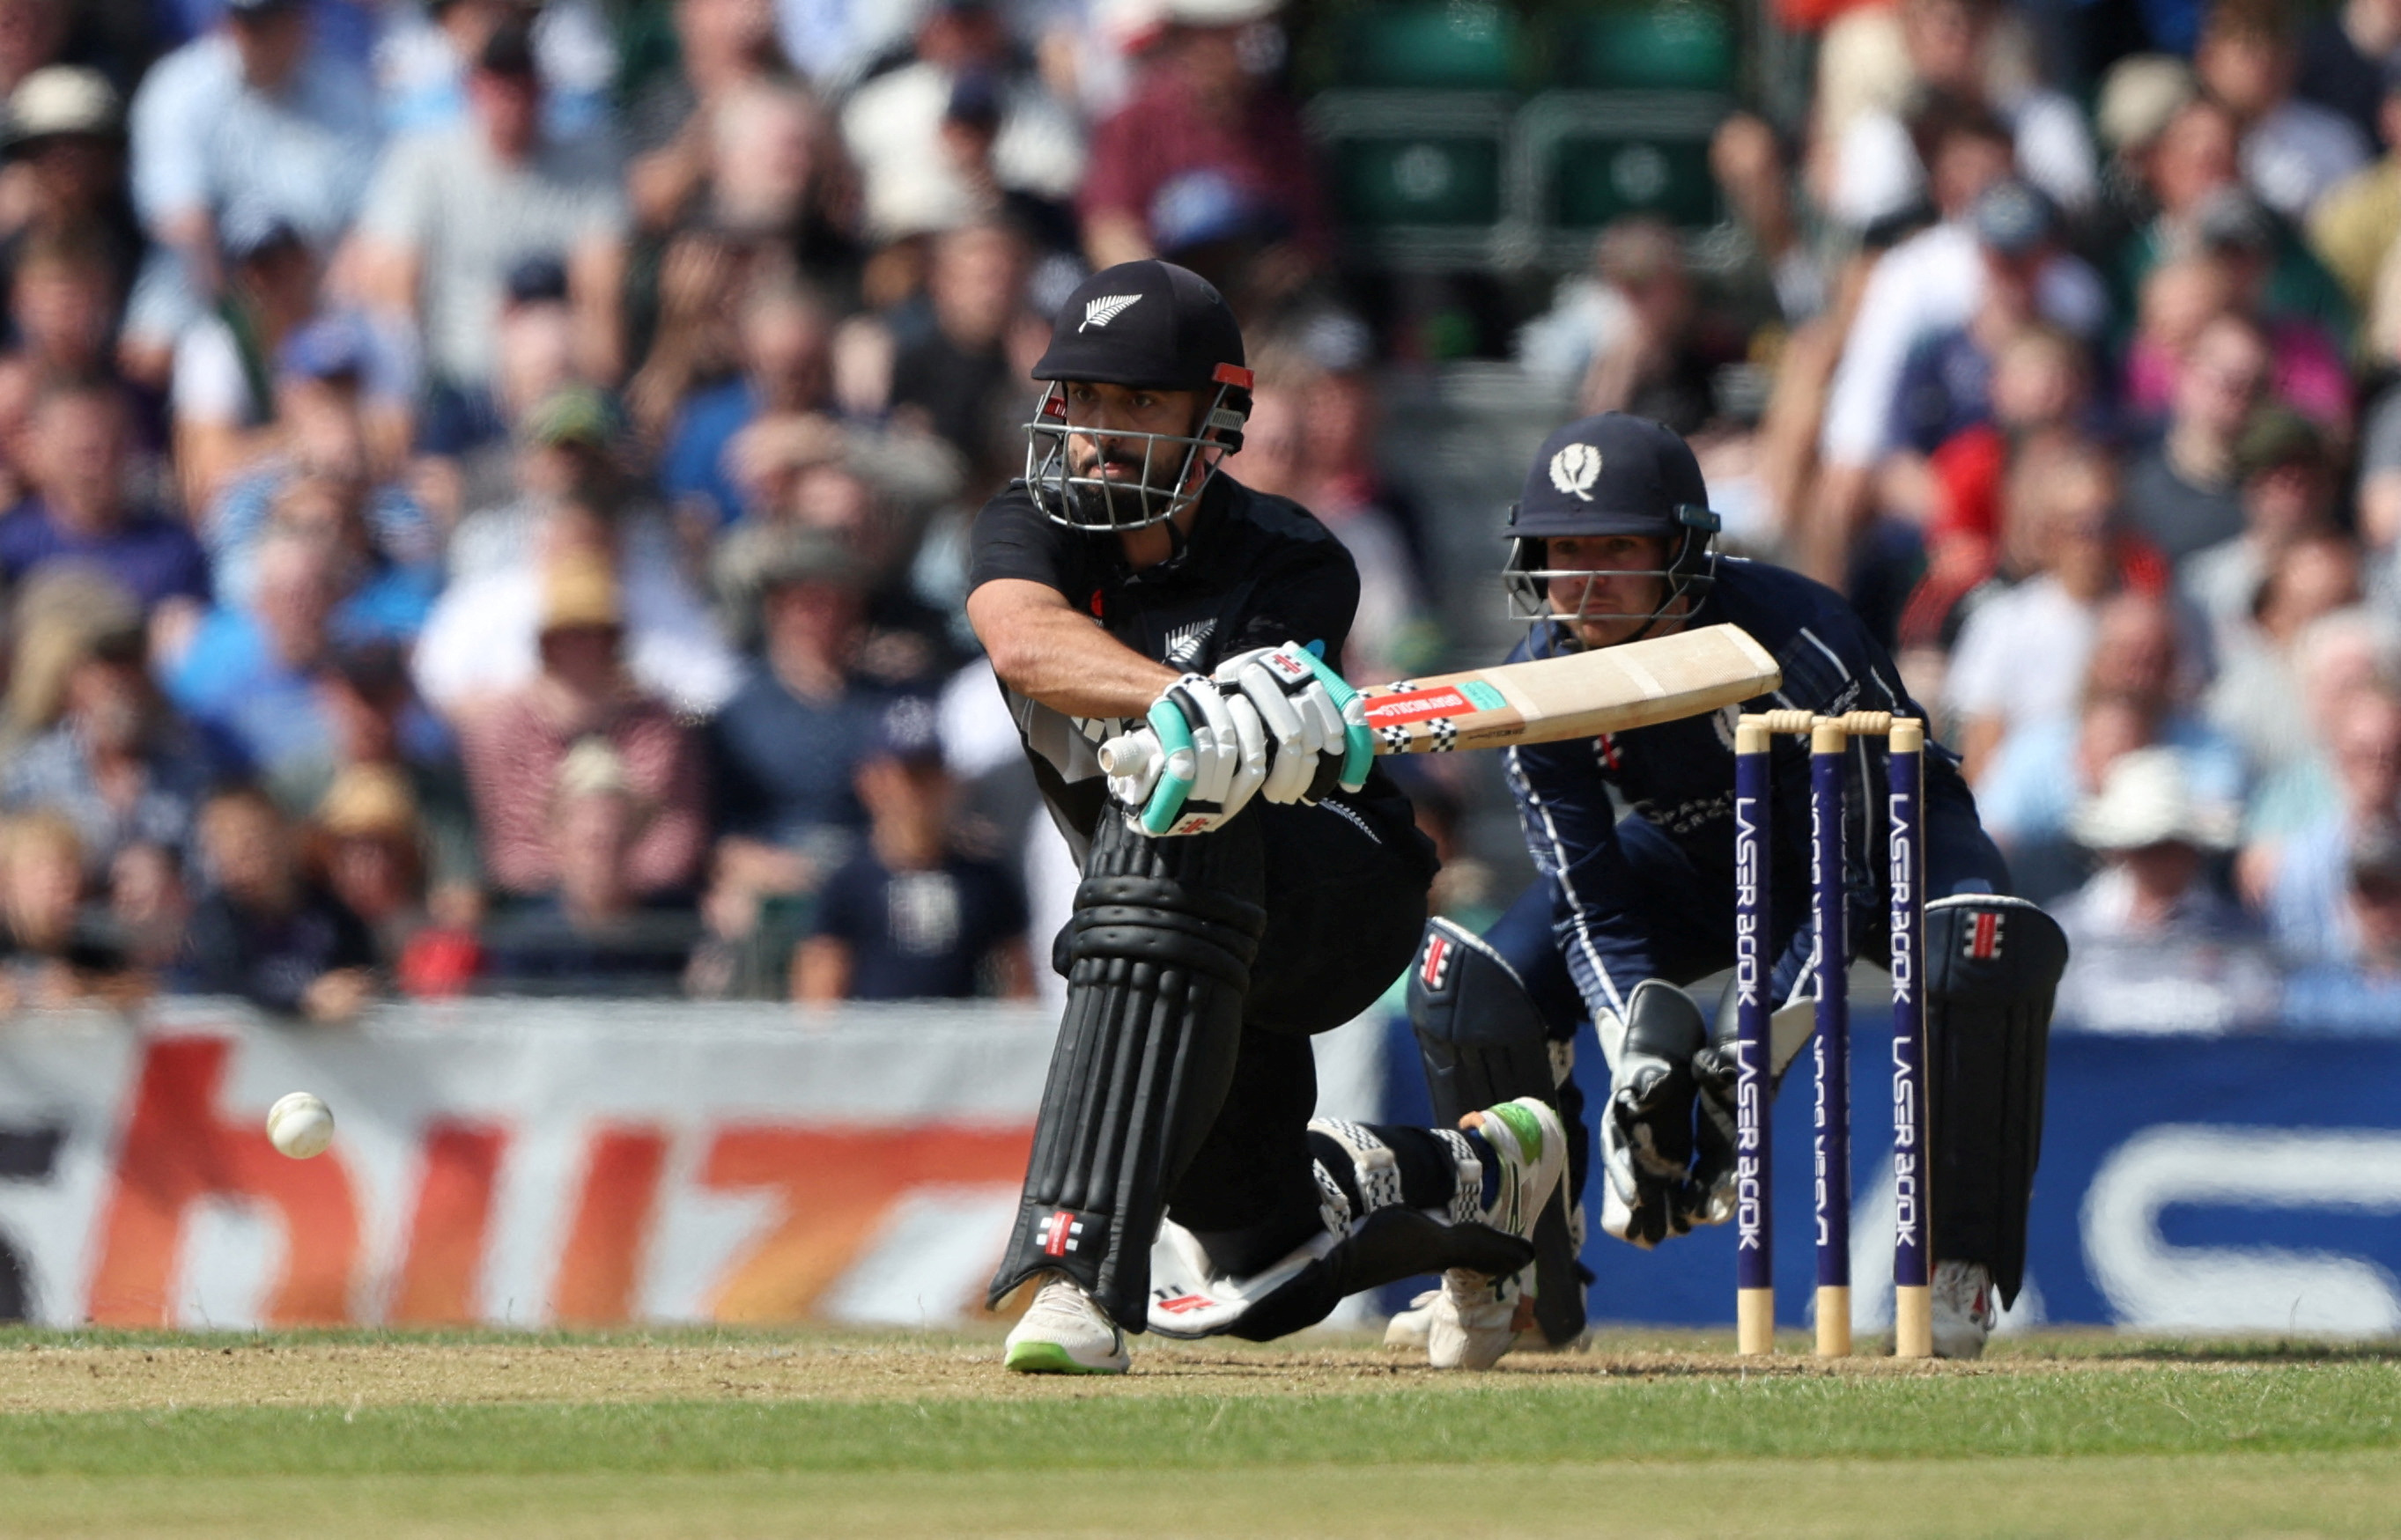 NZ's Mitchell to return against Sri Lanka - Southee | Reuters